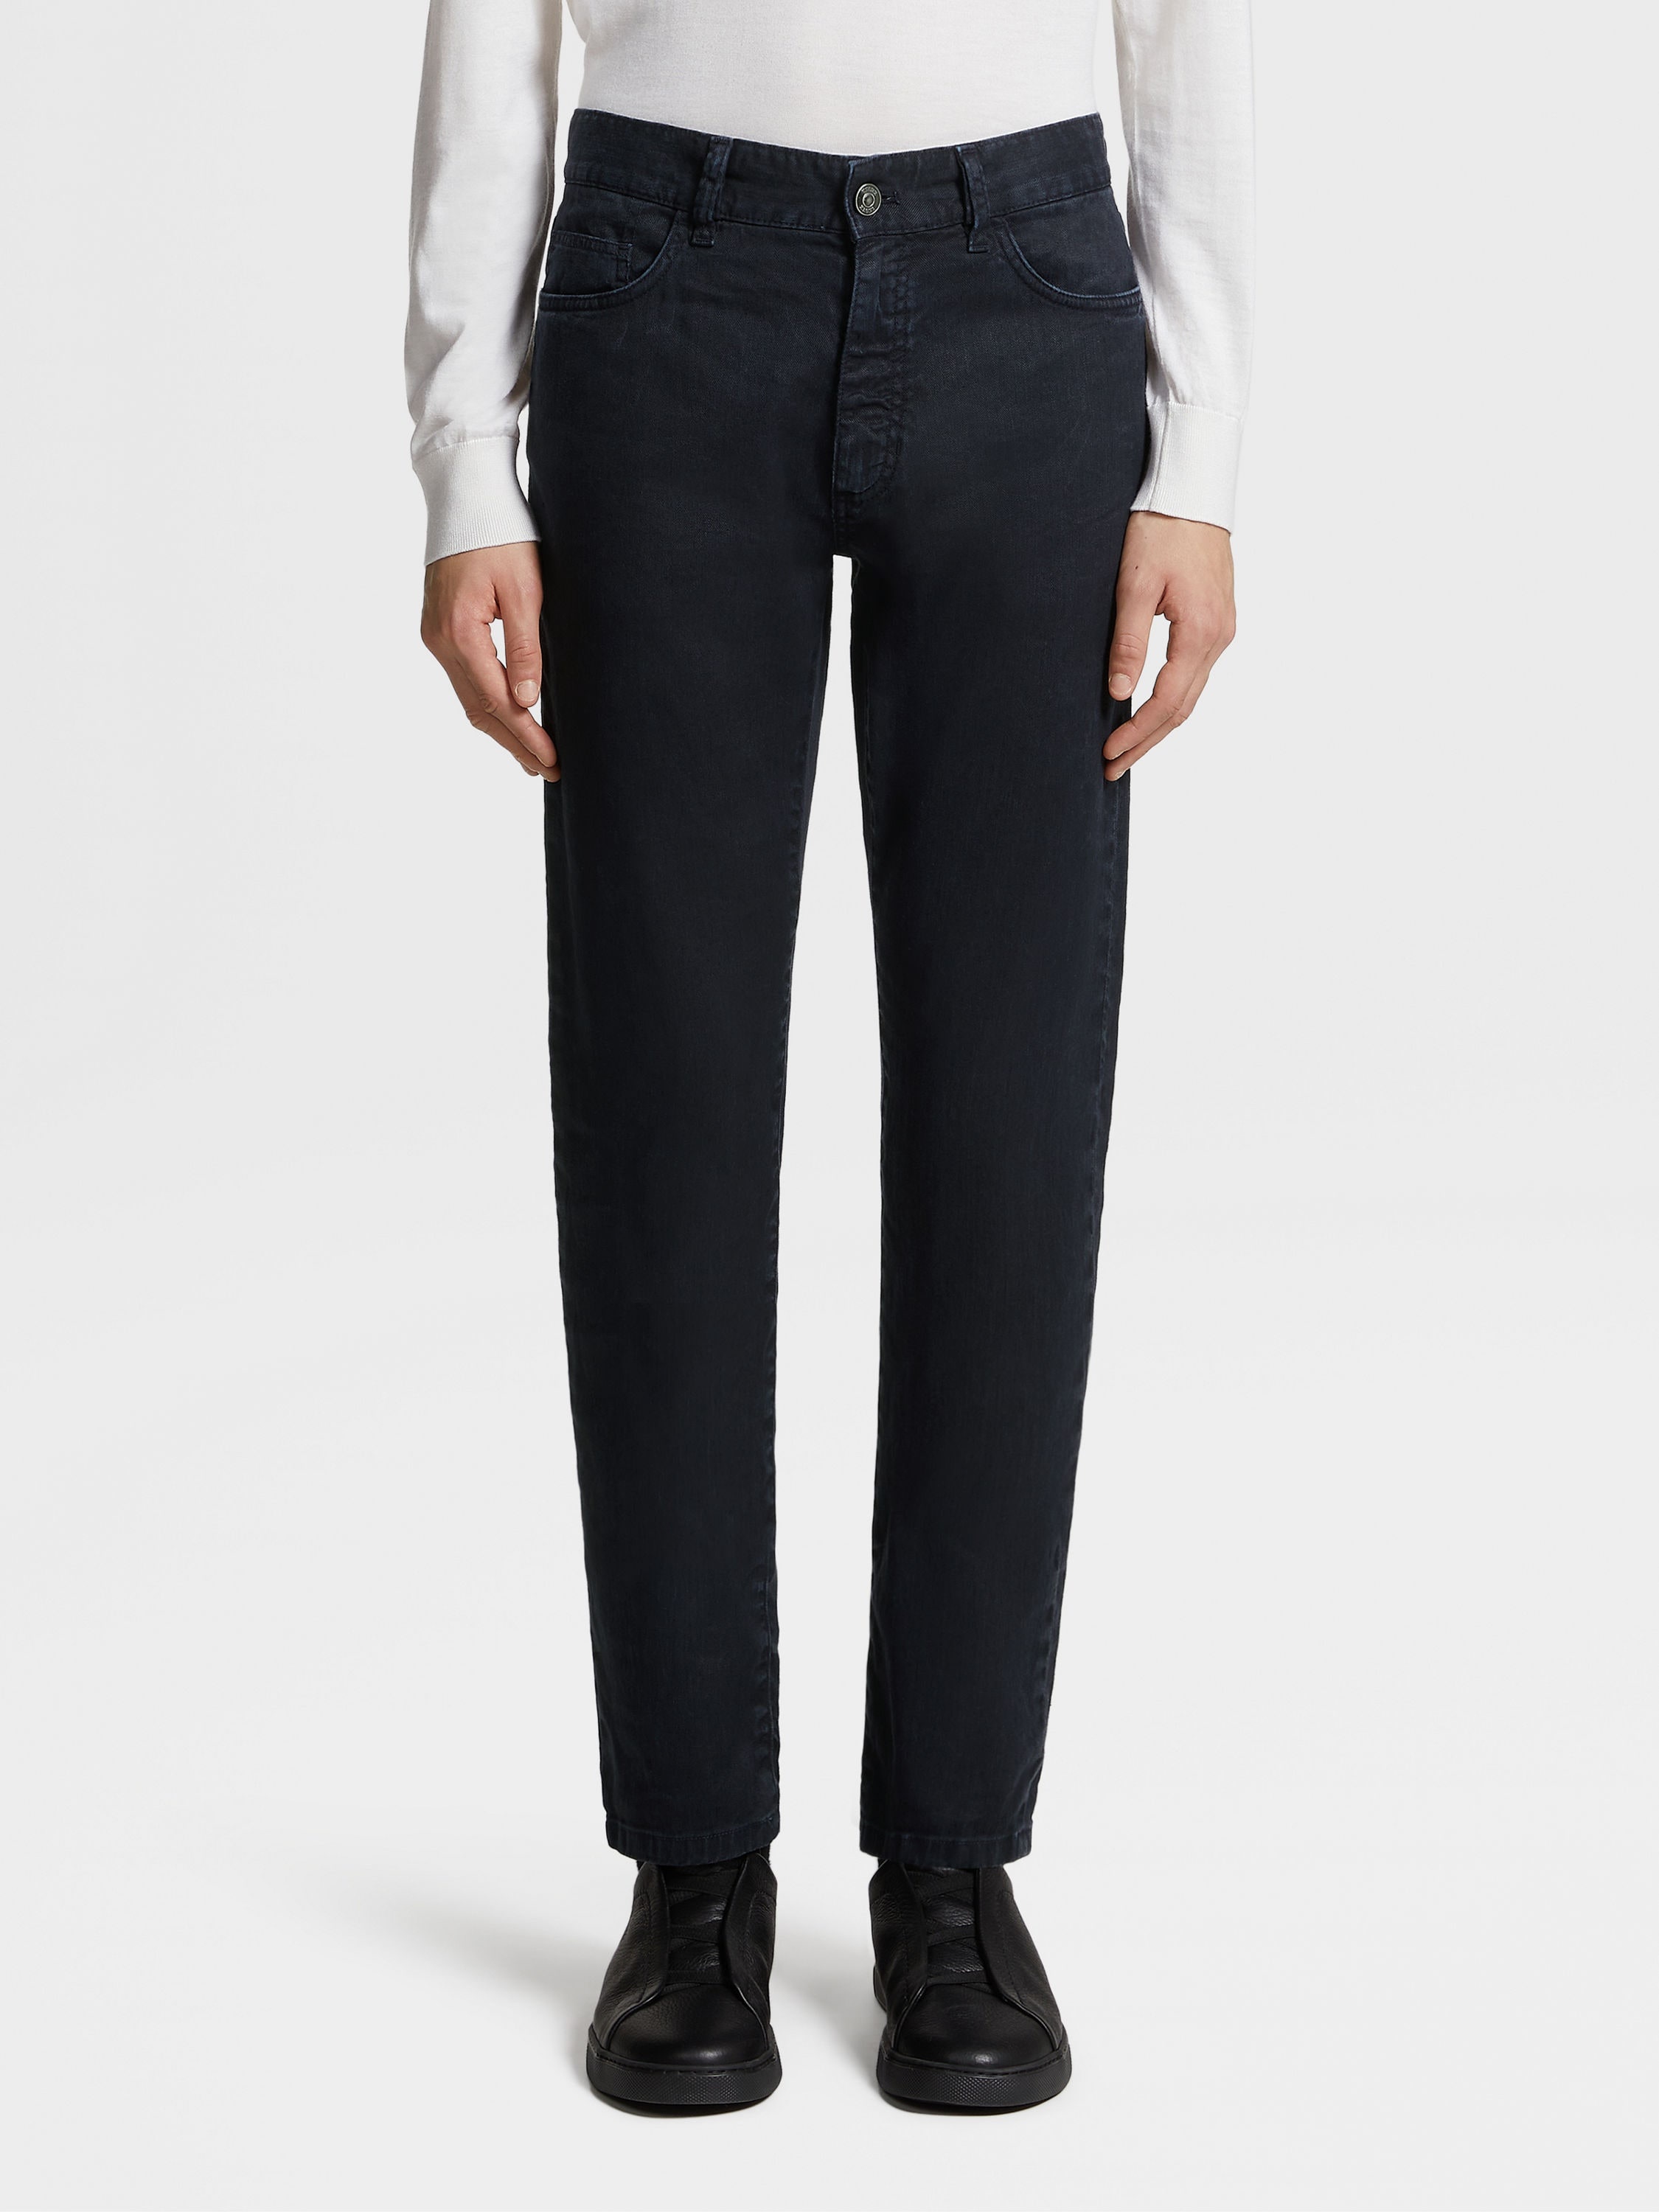 NAVY BLUE STRETCH LINEN AND COTTON JEANS - 2